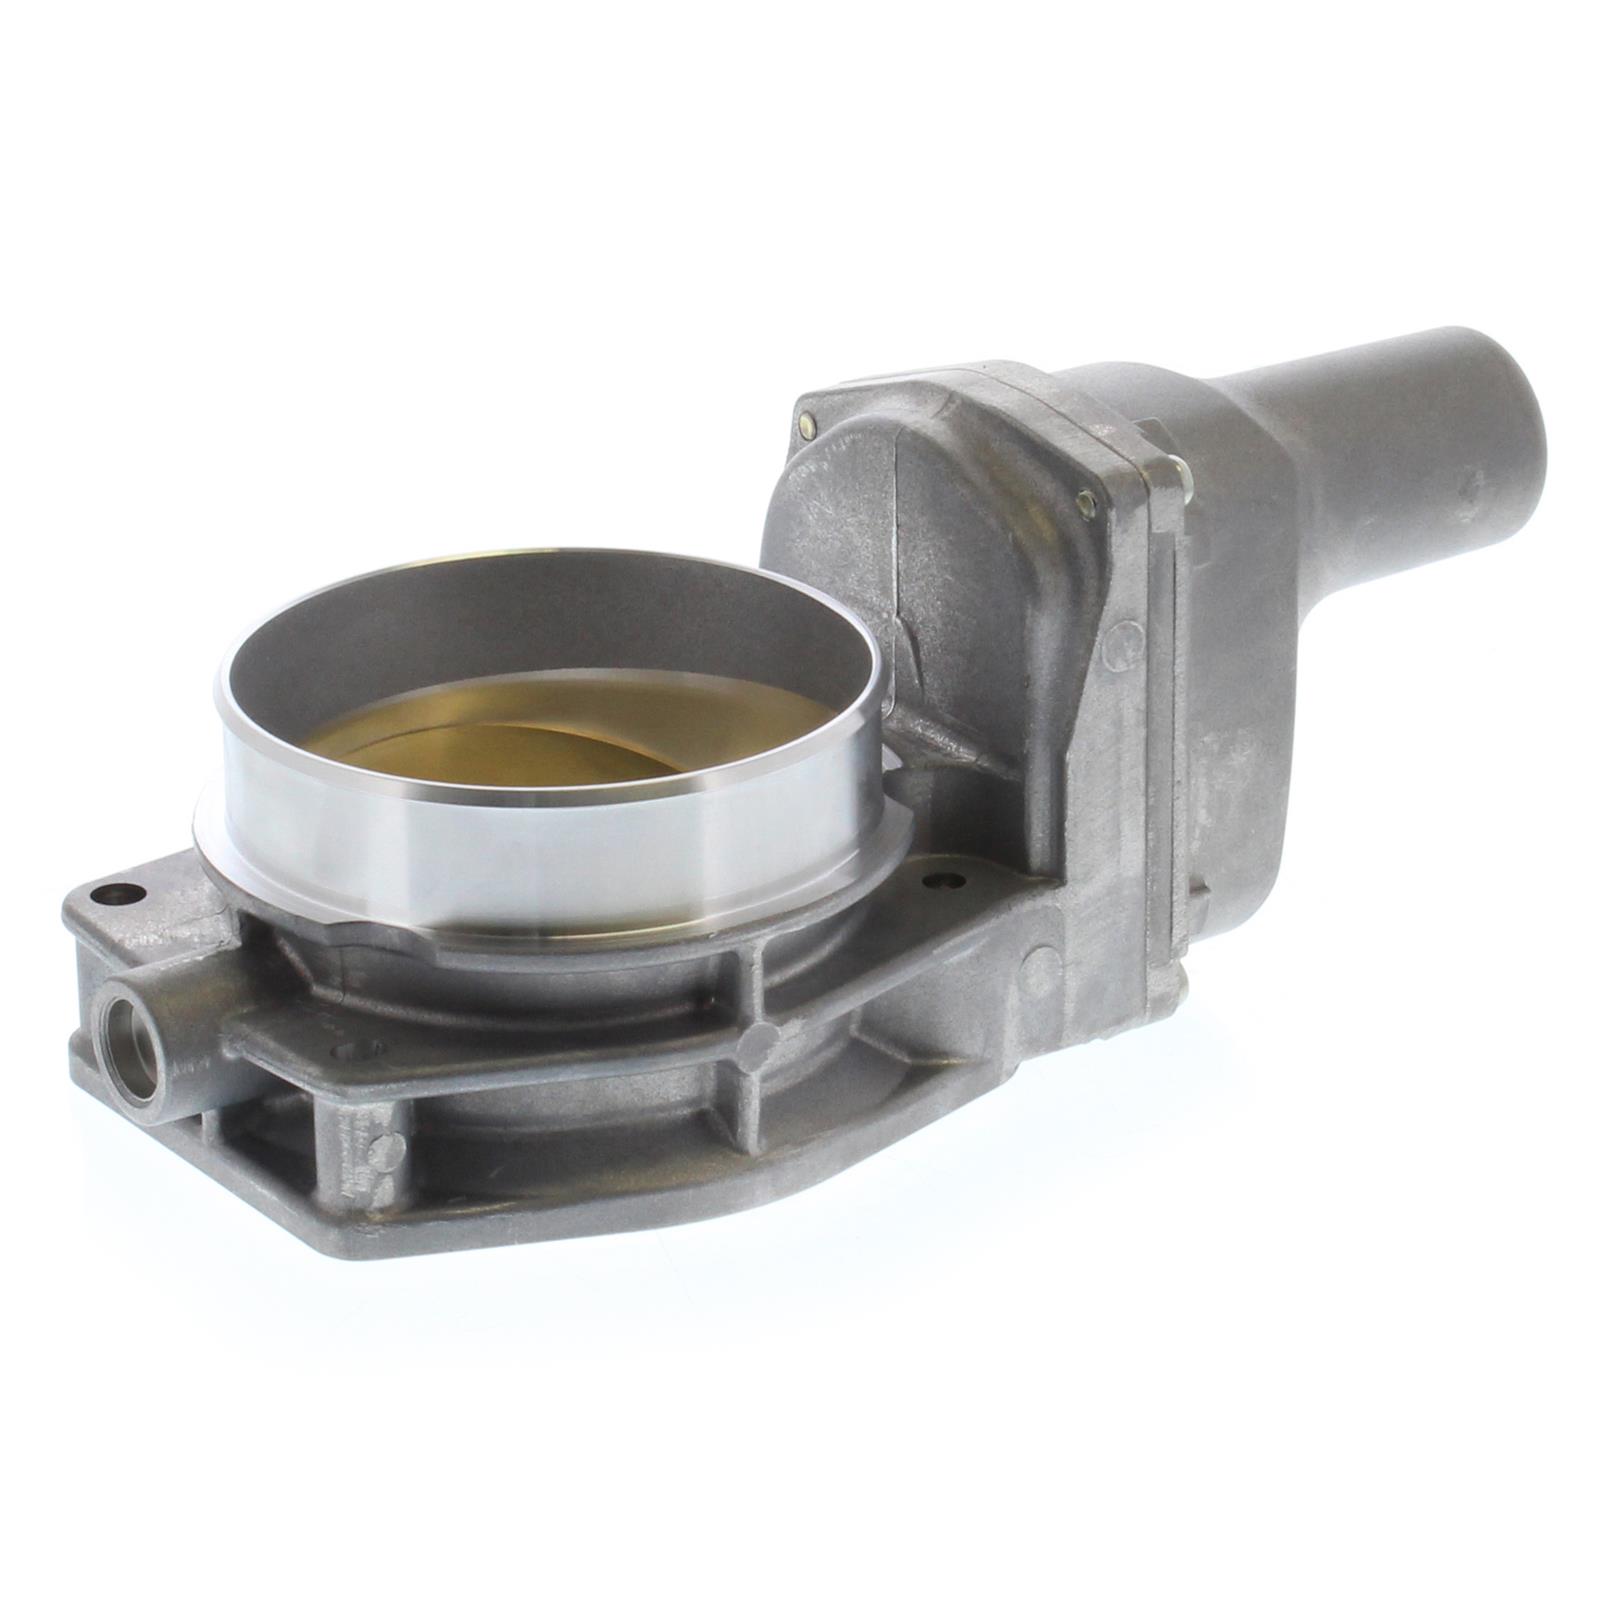 Details about  / New ACDelco 217-3349 Throttle Body FOR Chevy Colorado Canyon Cobalt BULK NO BOX